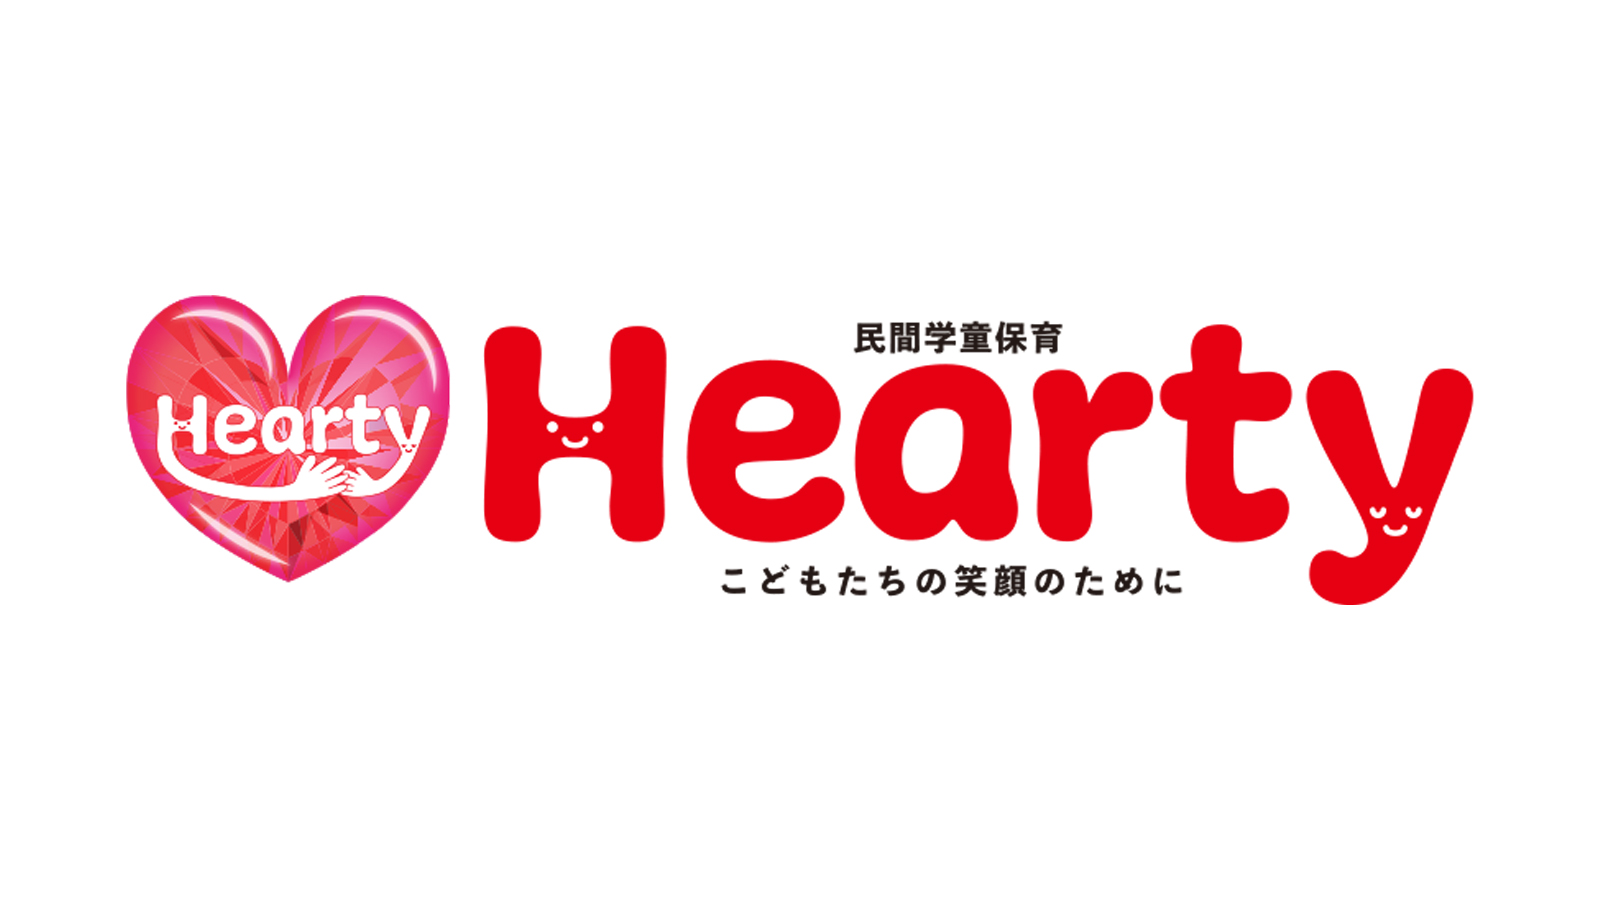 Announcement of family partnership agreement with Hearty